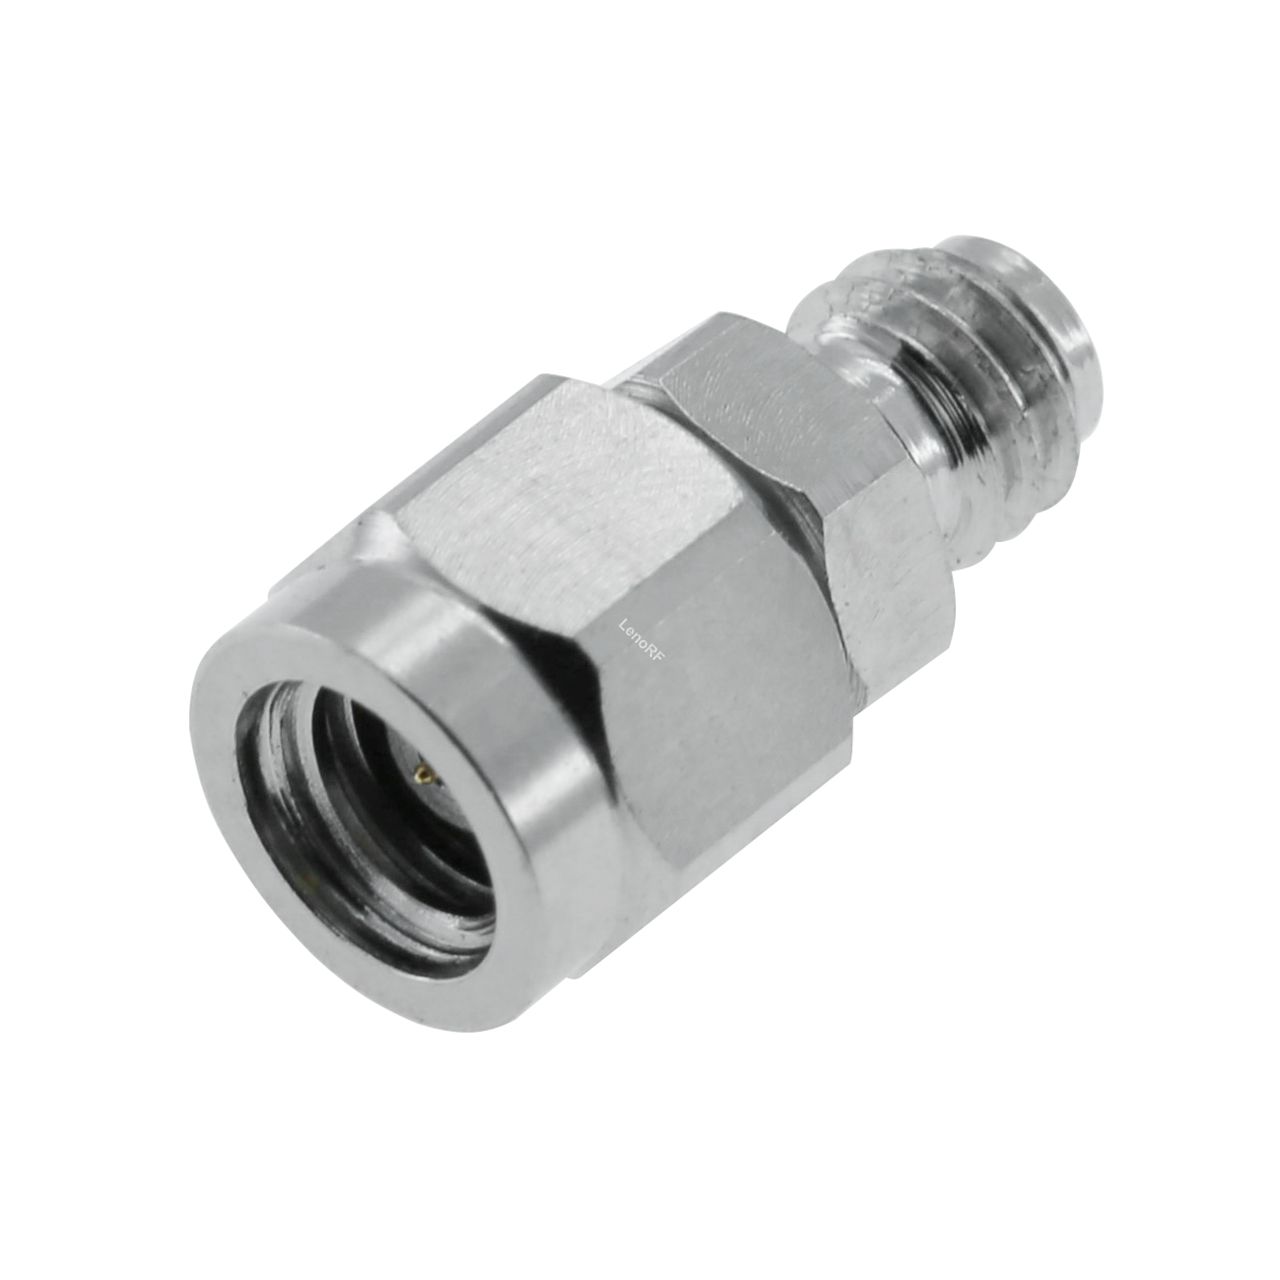 1.0 mm Plug To Jack Adapter 50 OHM Straight Stainless Steel 